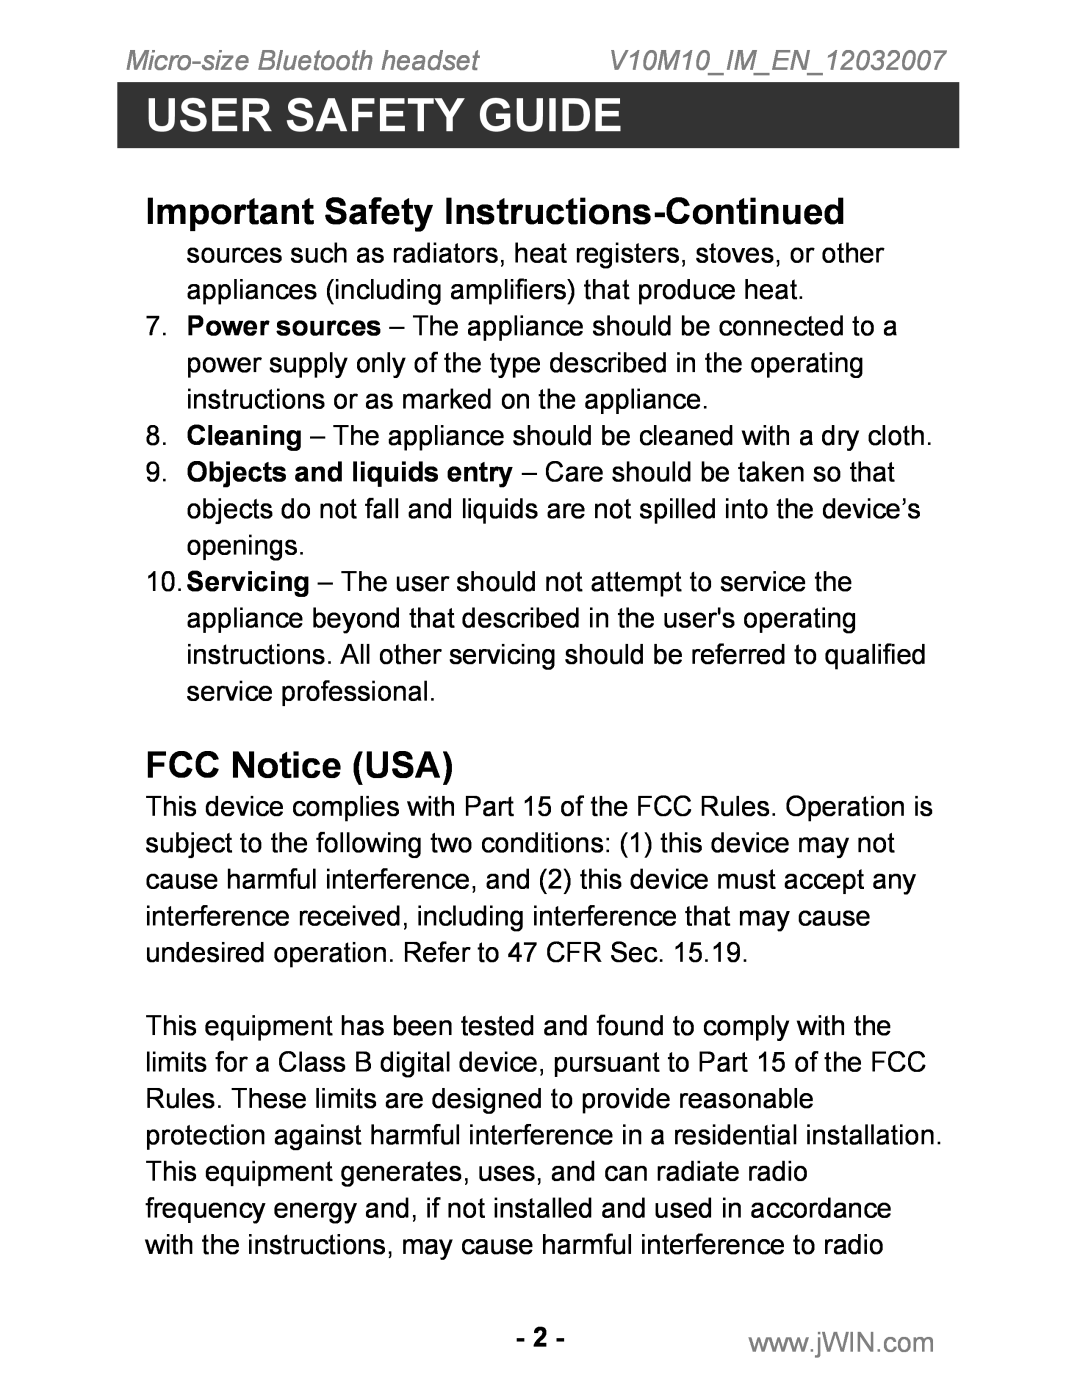 Jwin JB-TH210 Important Safety Instructions-Continued, FCC Notice USA, User Safety Guide, Micro-sizeBluetooth headset 